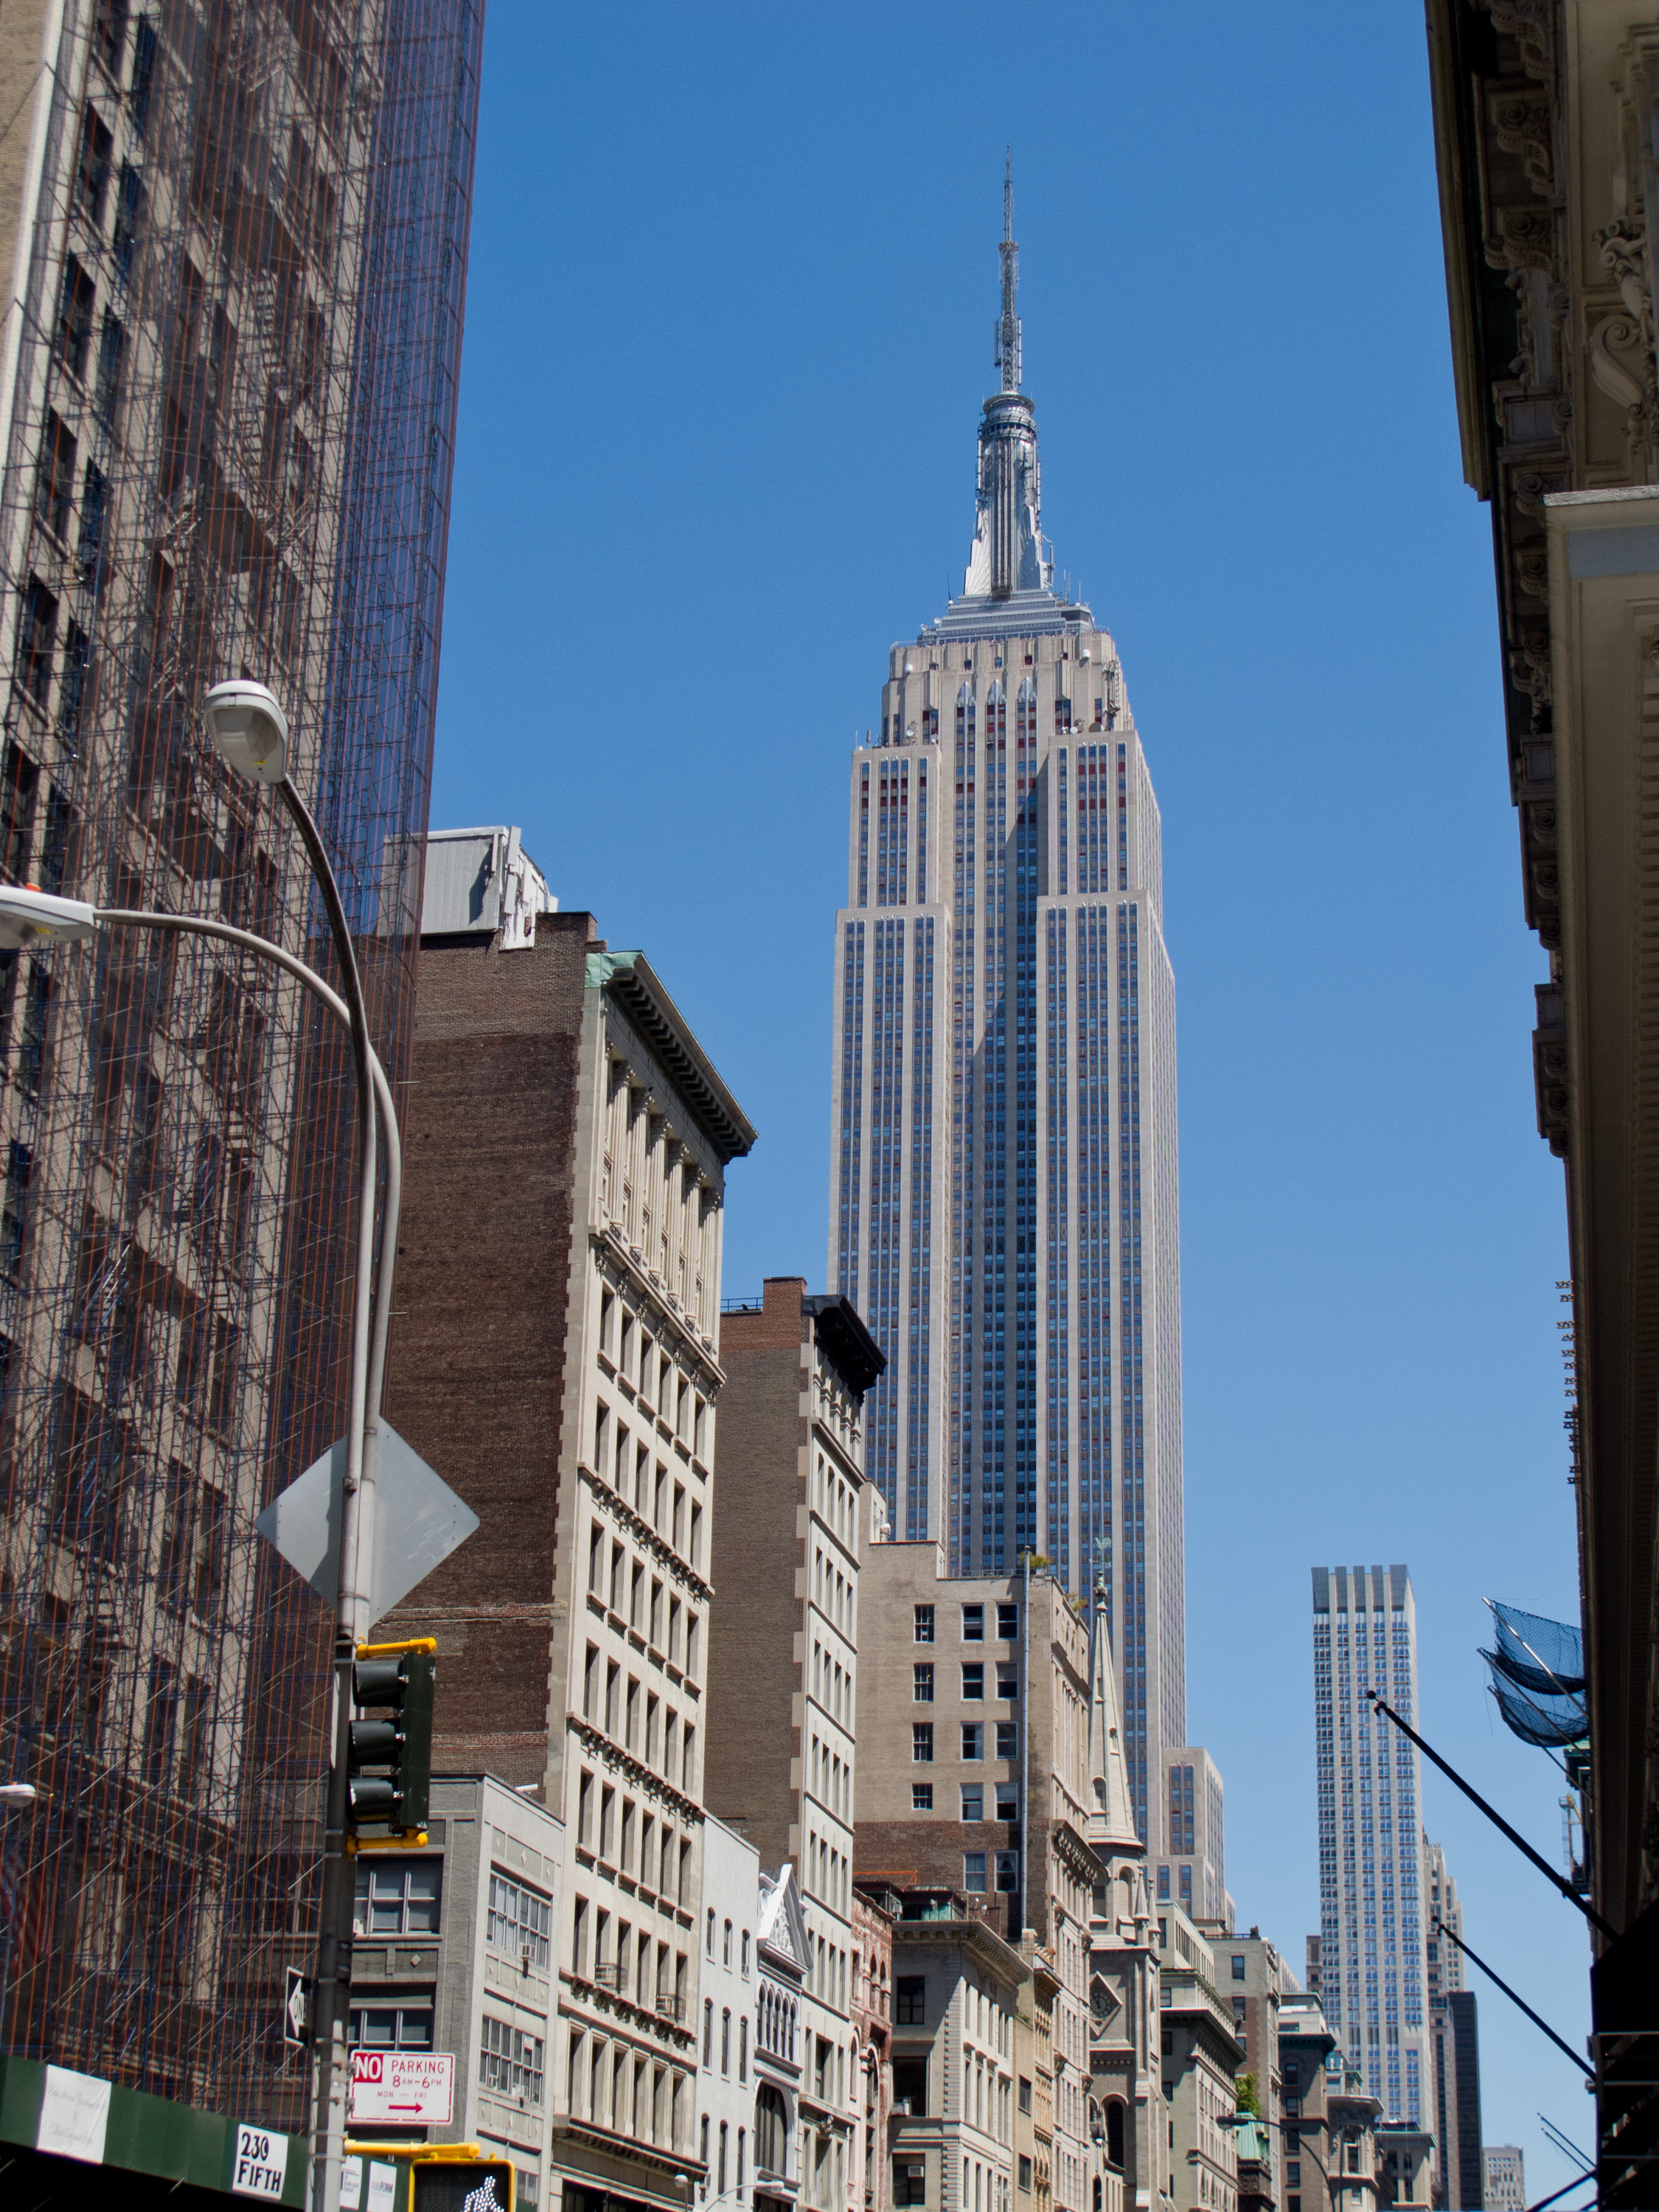 File:Empire State Building - 01.jpg - Wikimedia Commons